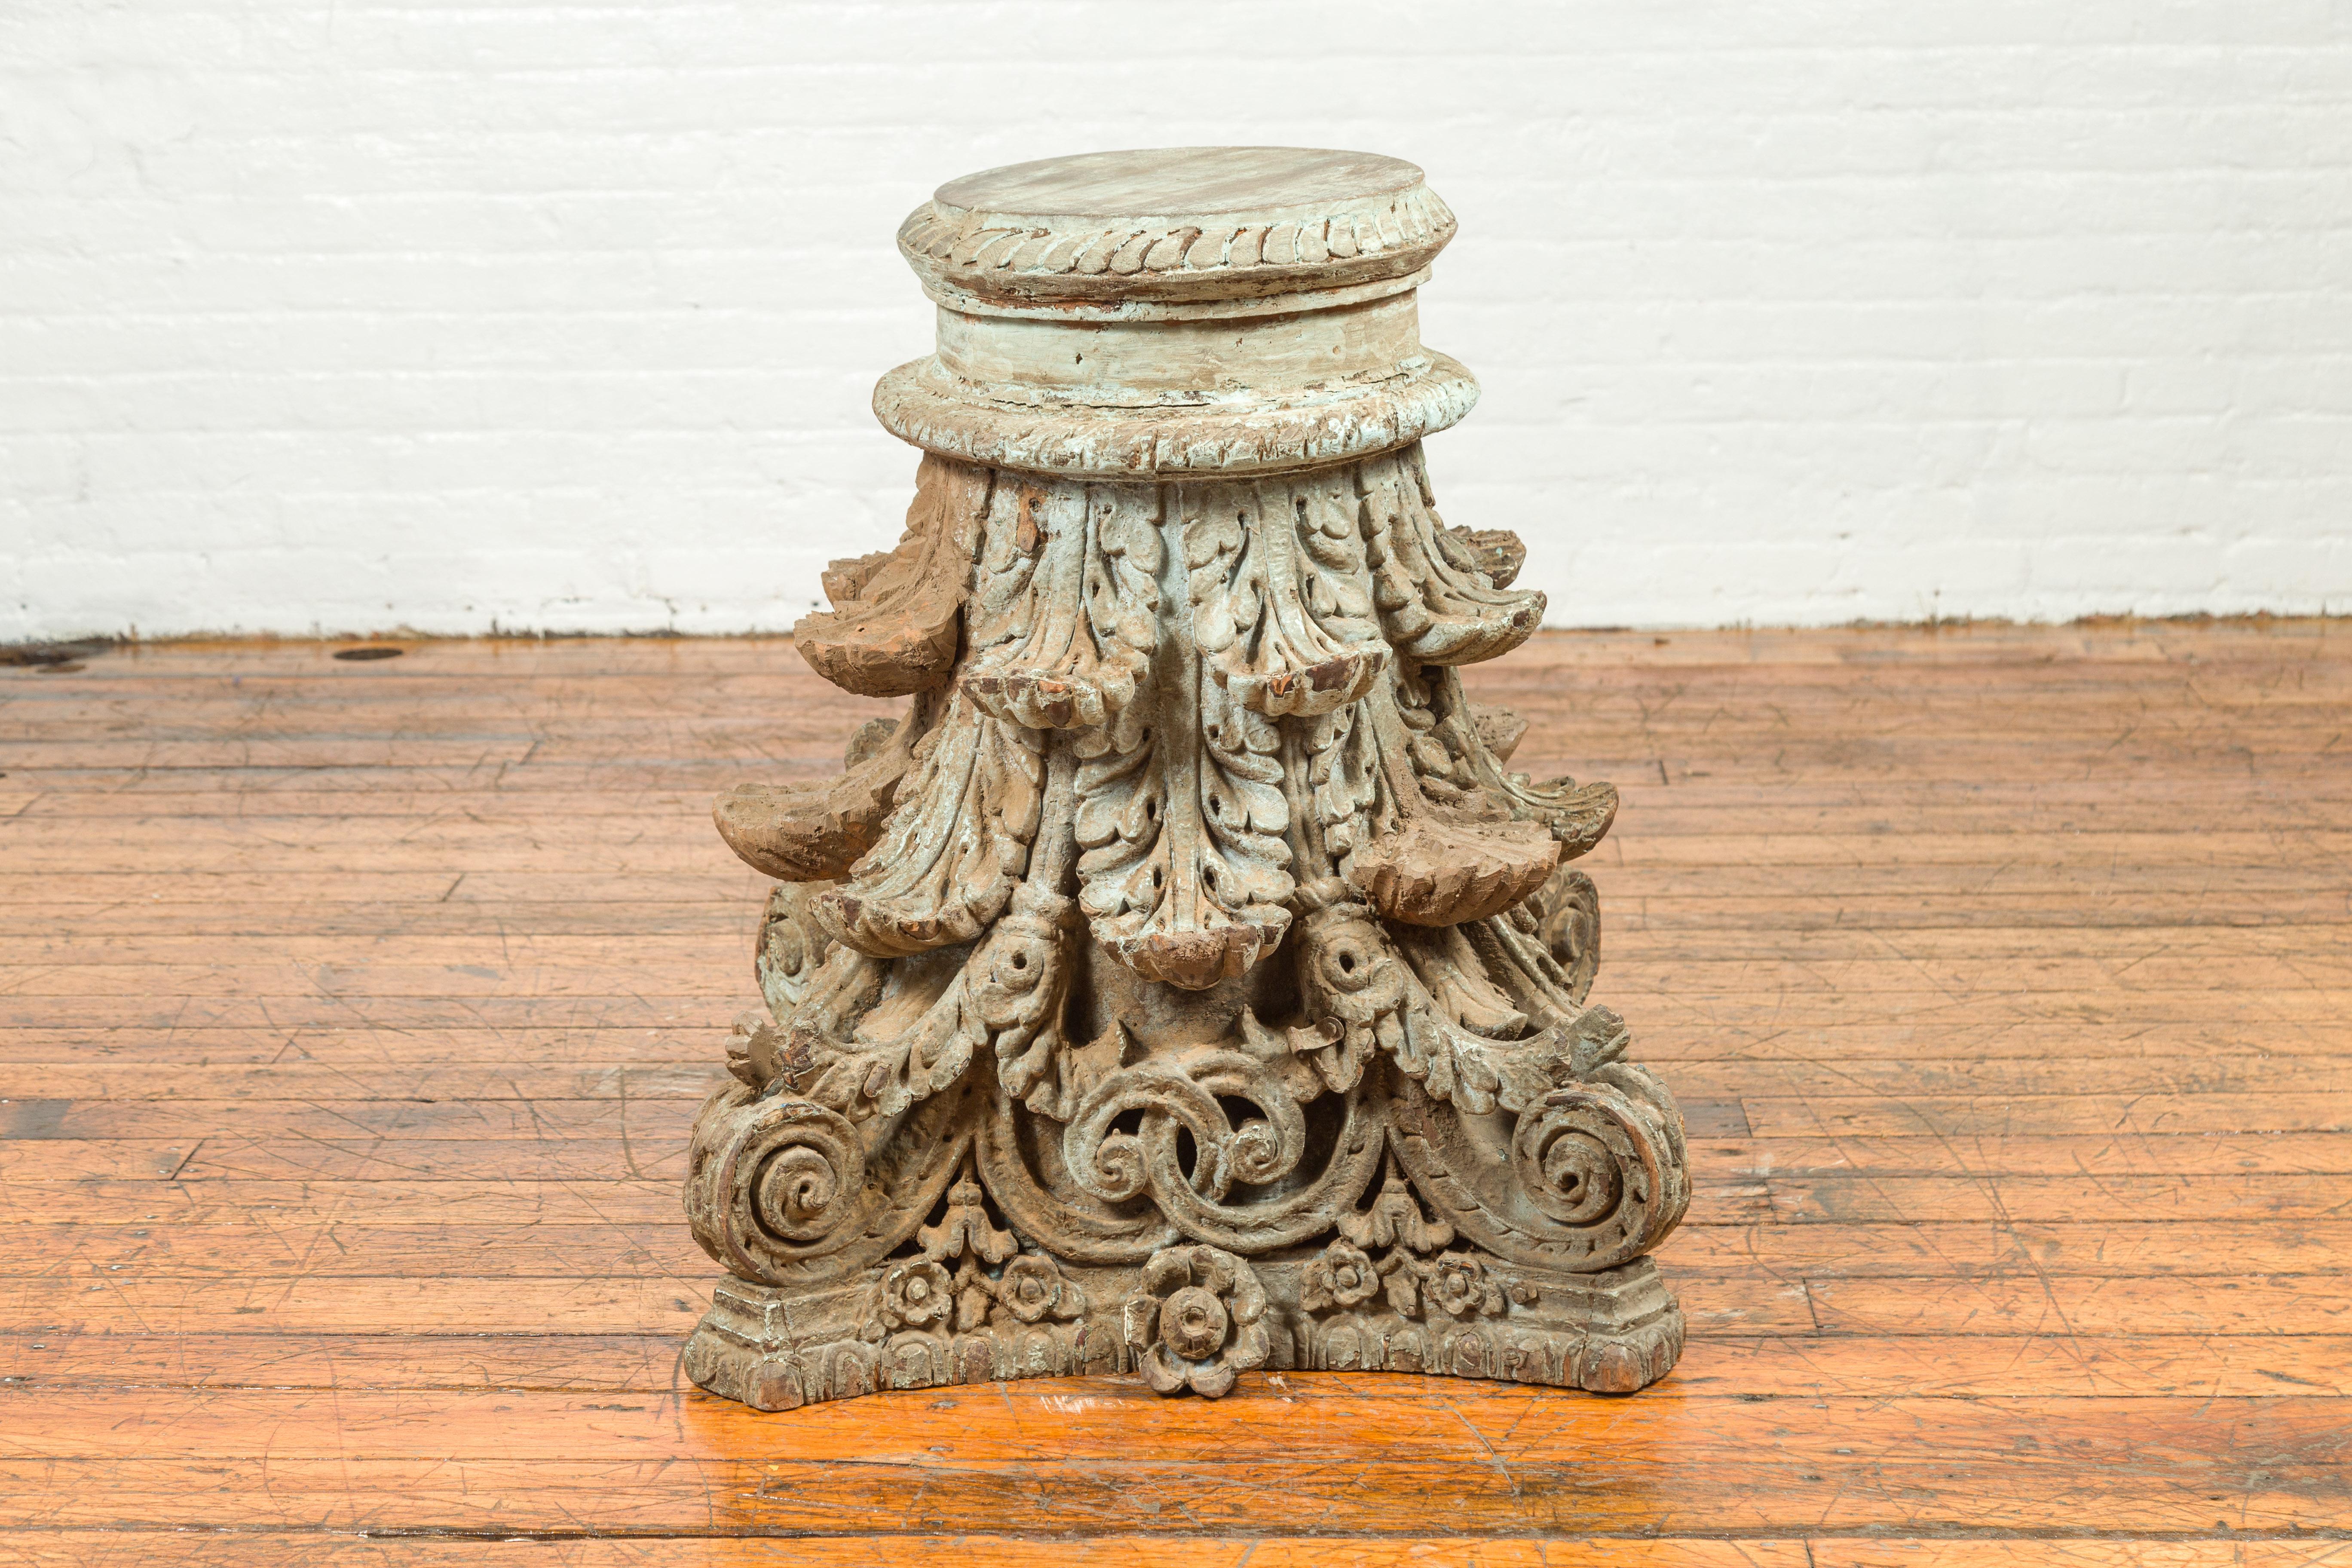 Indian Antique Corinthian Temple Capital Carving with Distressed Patina For Sale 4